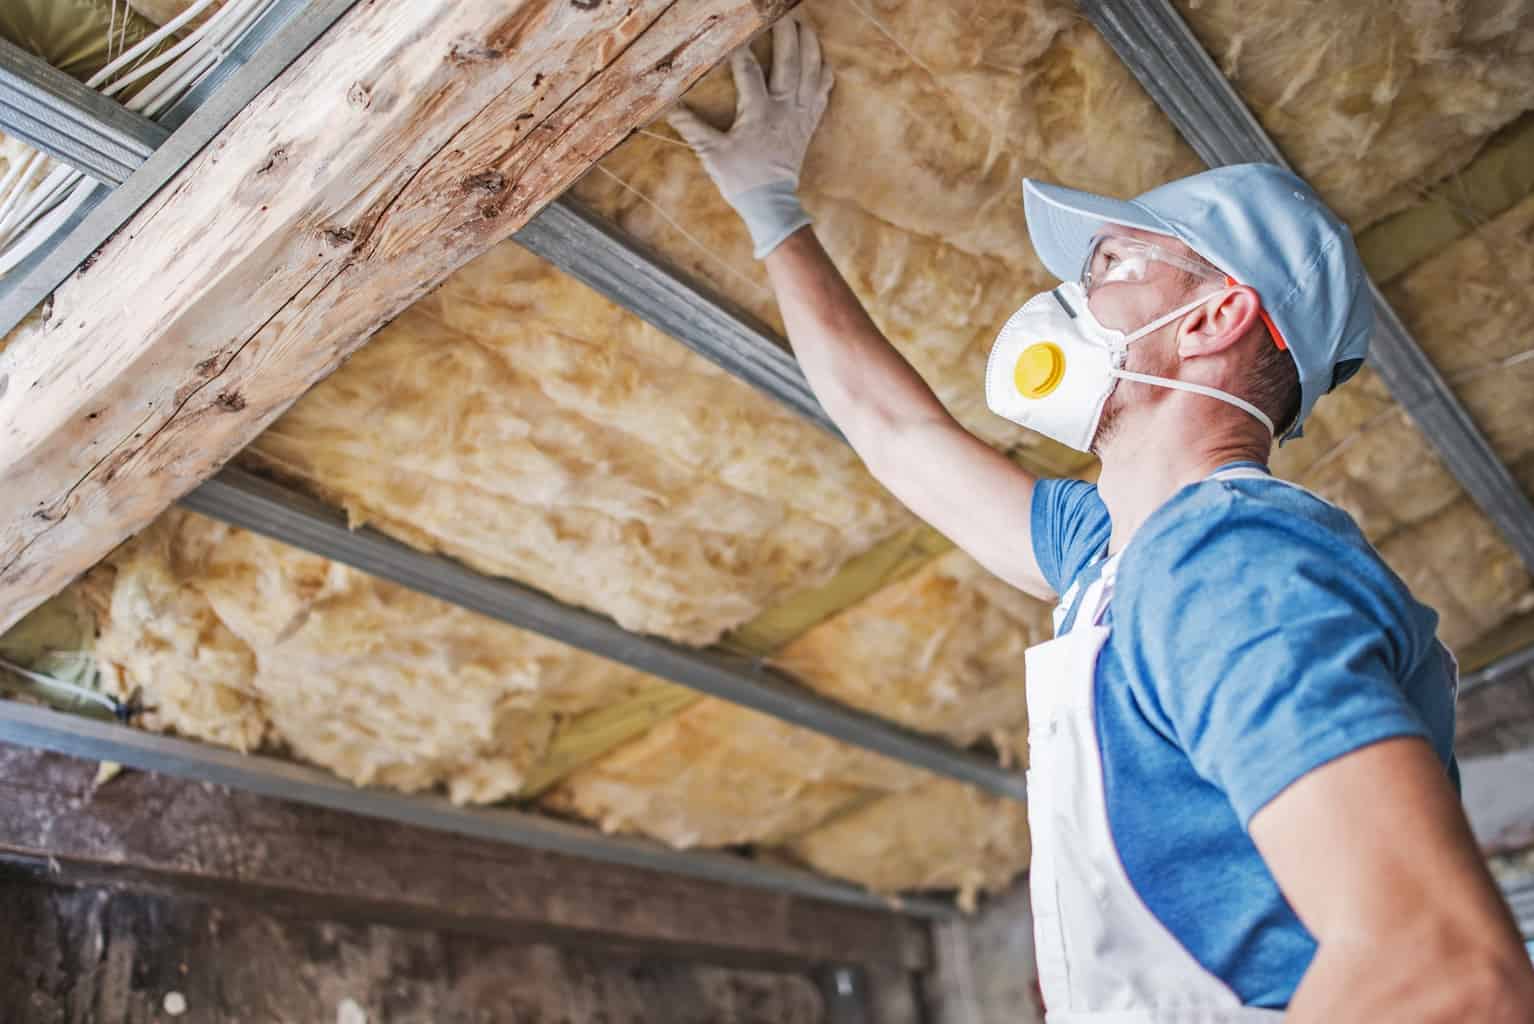 8 Pros And Cons Of Basement Ceiling Insulation - How To Cover Exposed Insulation In Basement Ceiling